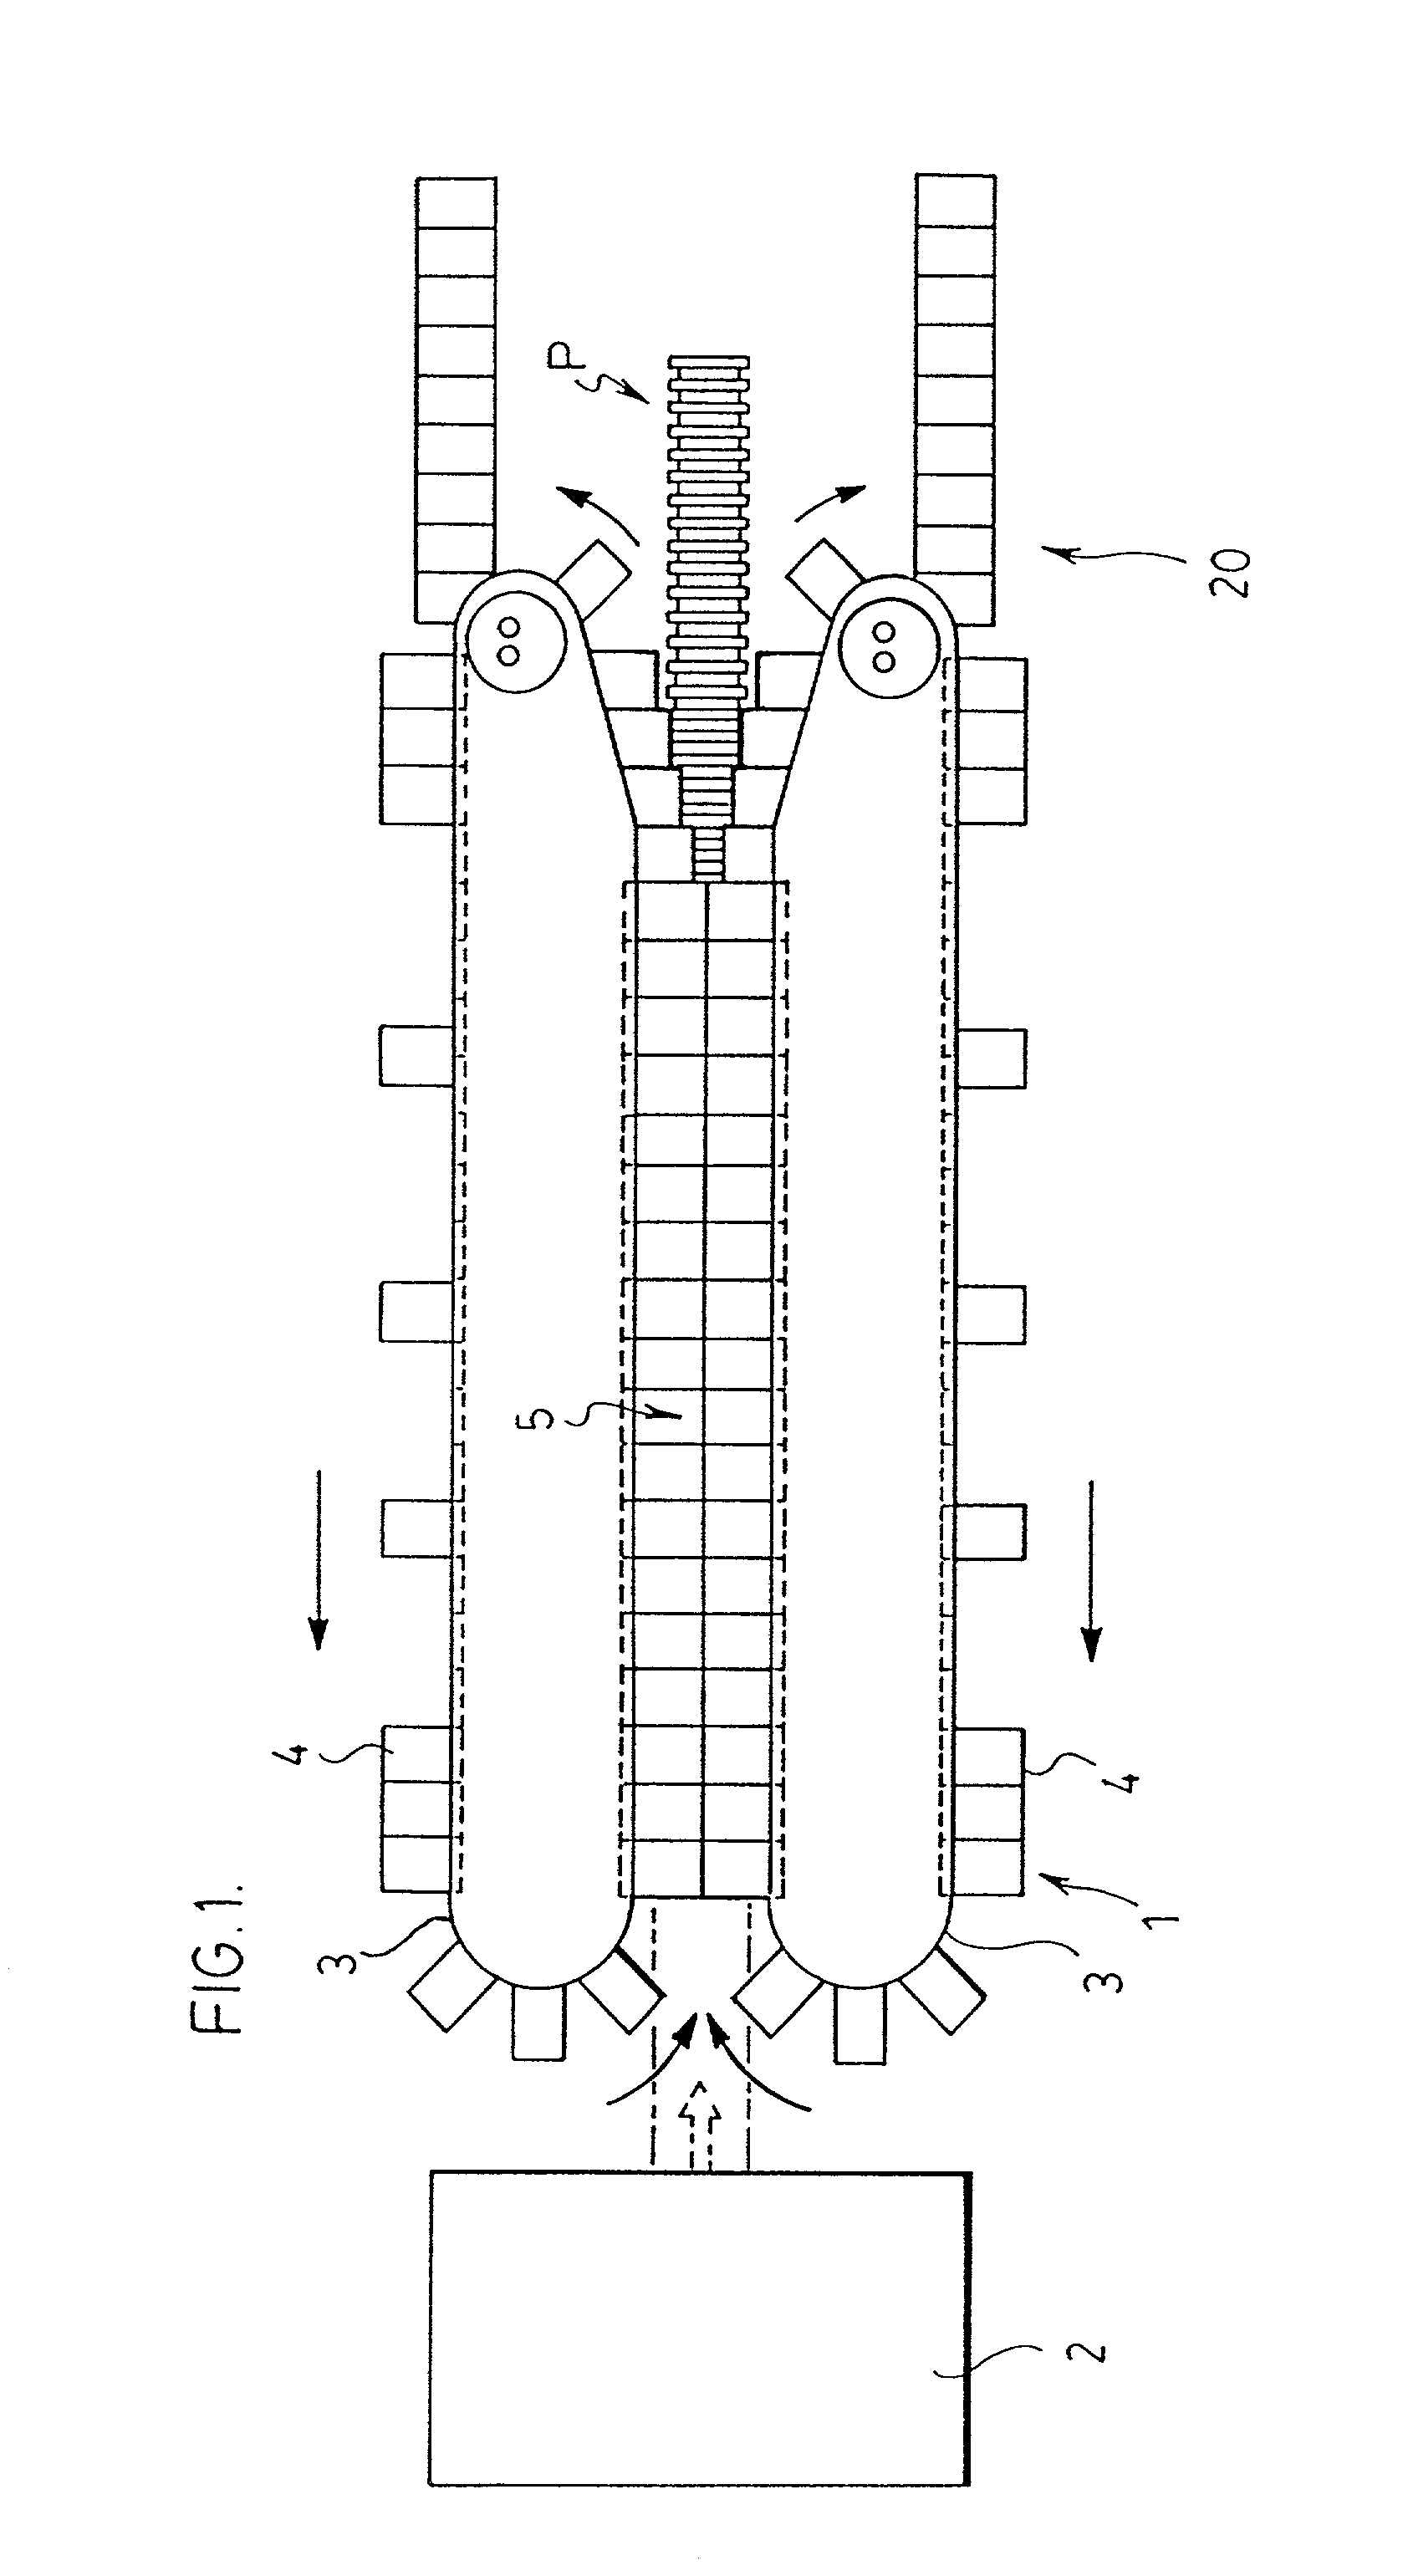 Molding apparatus with mold block section transfer system